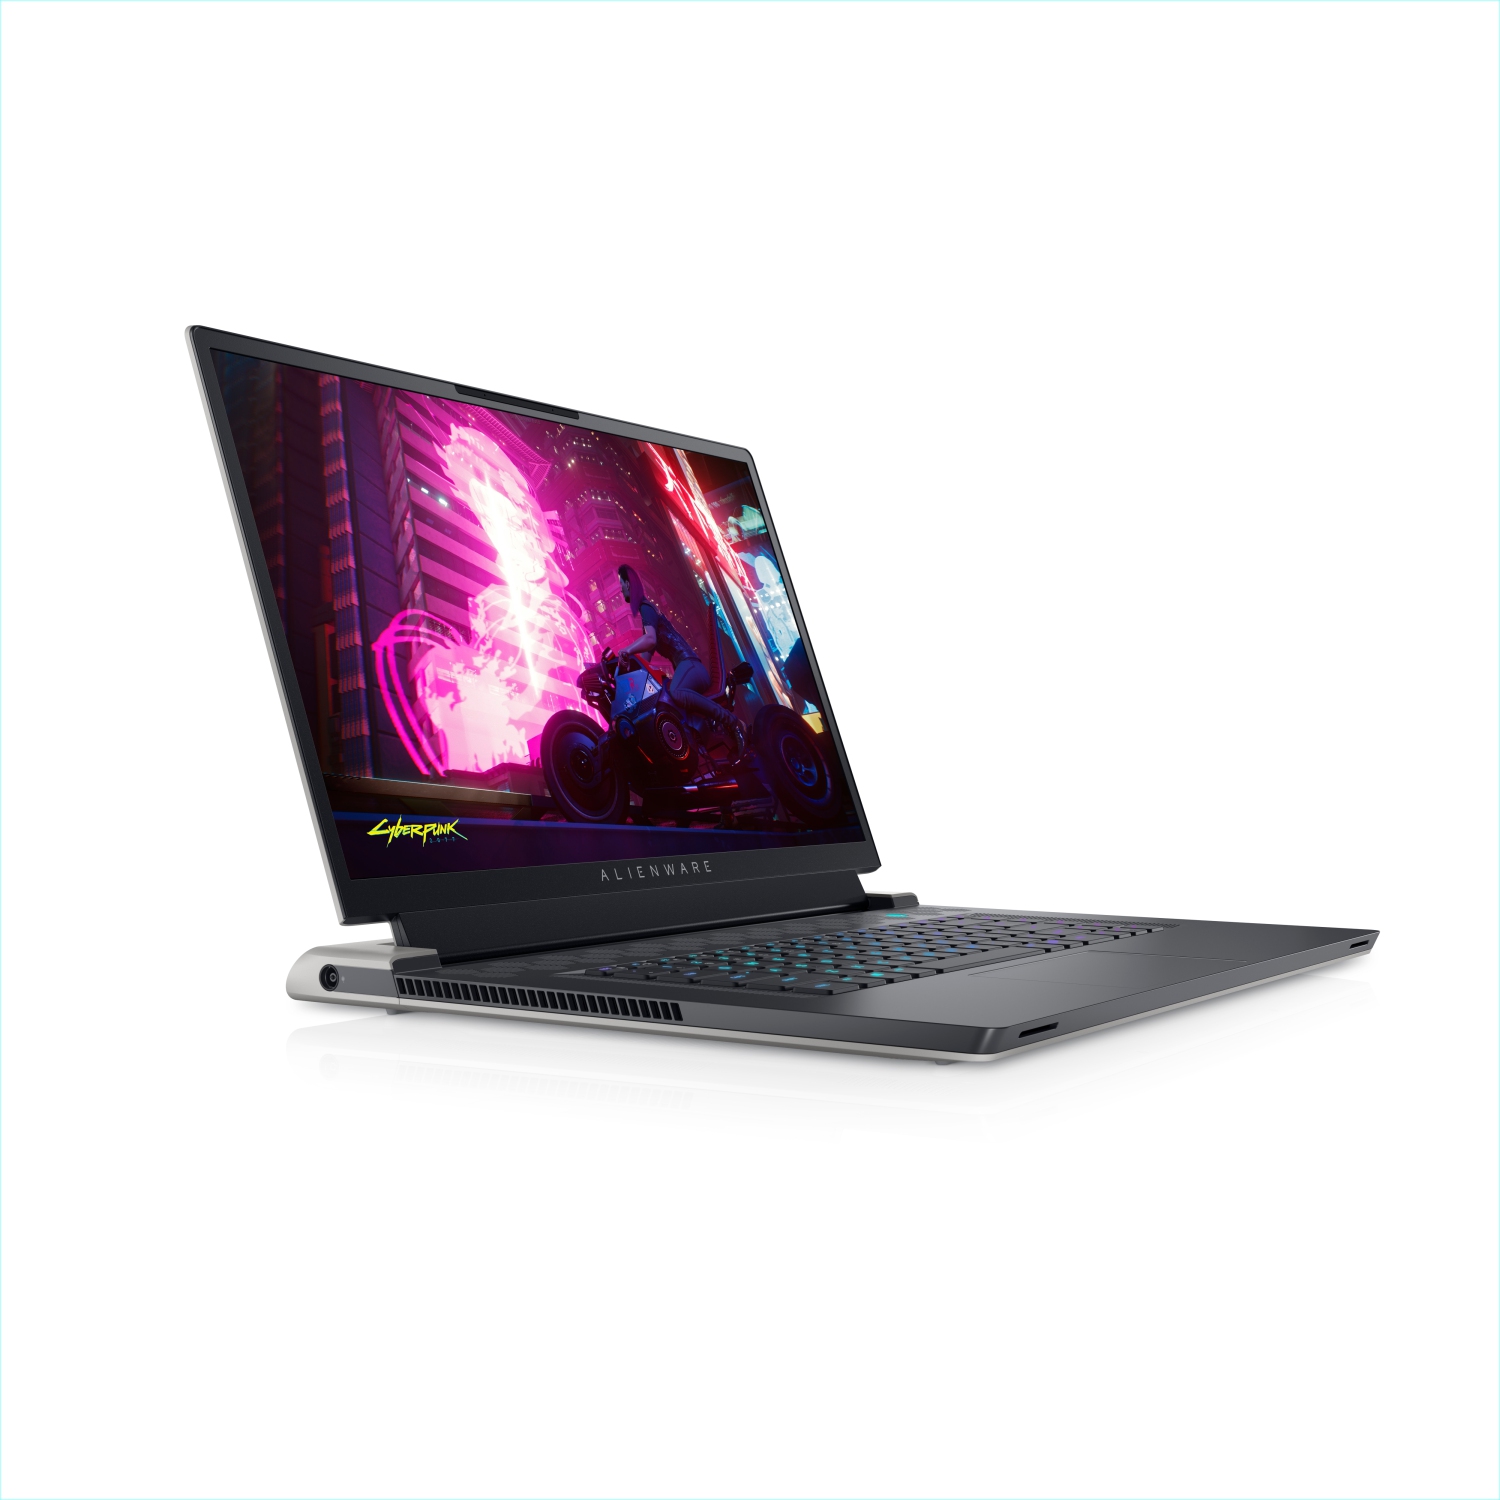 Refurbished (Excellent) - Dell Alienware X17 R1 Gaming Laptop (2021), 17.3" FHD, Core i7, 1TB SSD + 512GB SSD, 32GB RAM, RTX 3070, 4.6 GHz, 11th Gen CPU Certified